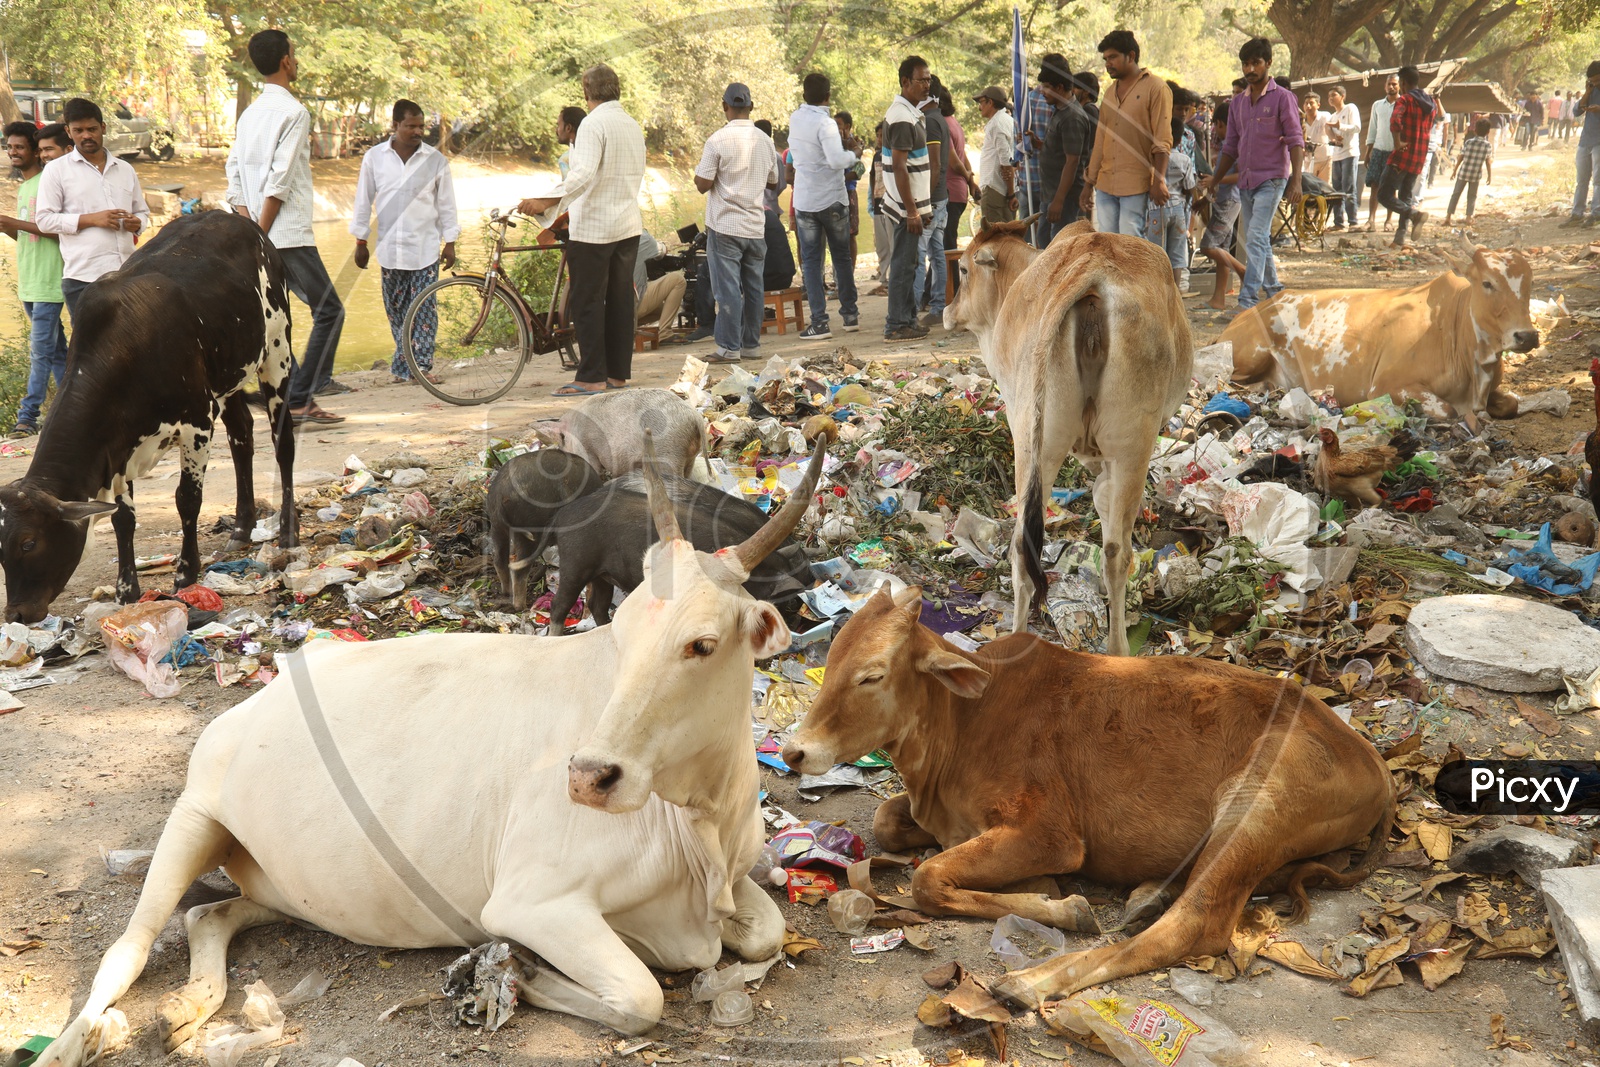 Cattle, hen, pigs in the garbage while people are moving around  - Street view